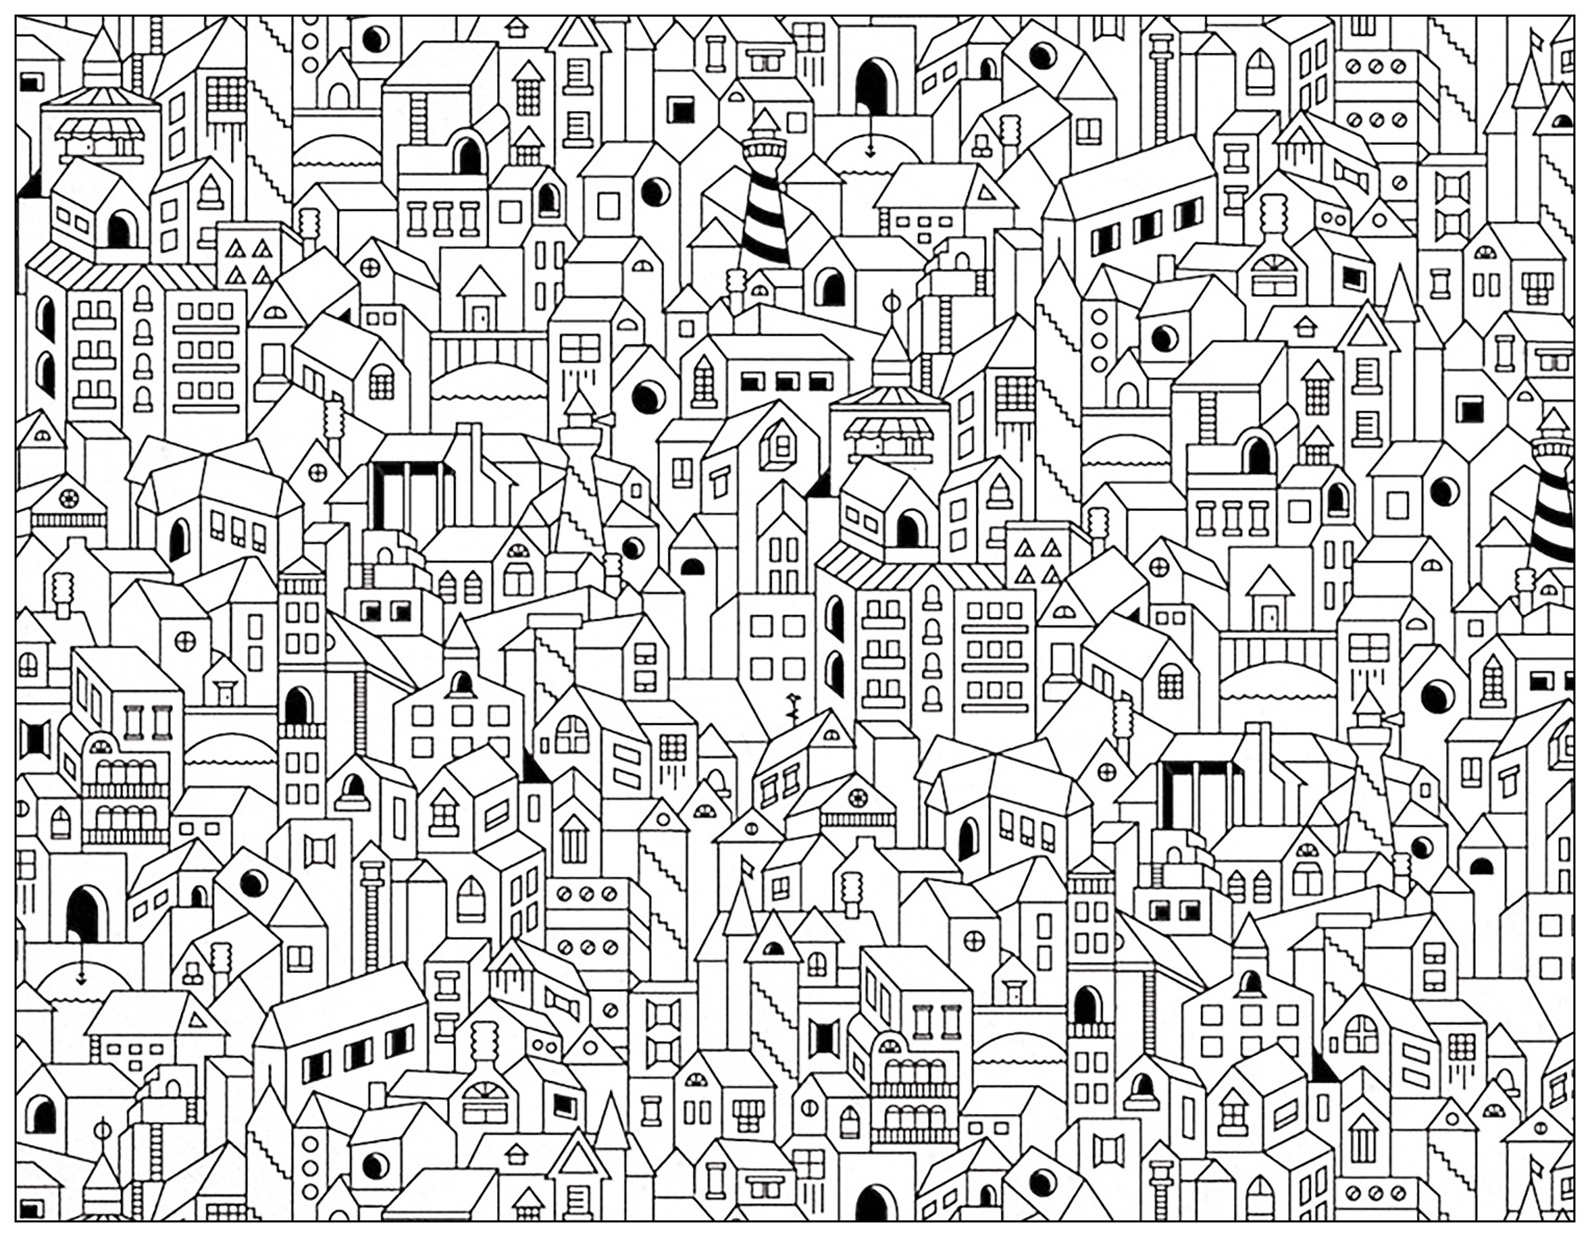 Doodle Art coloring page to print and color